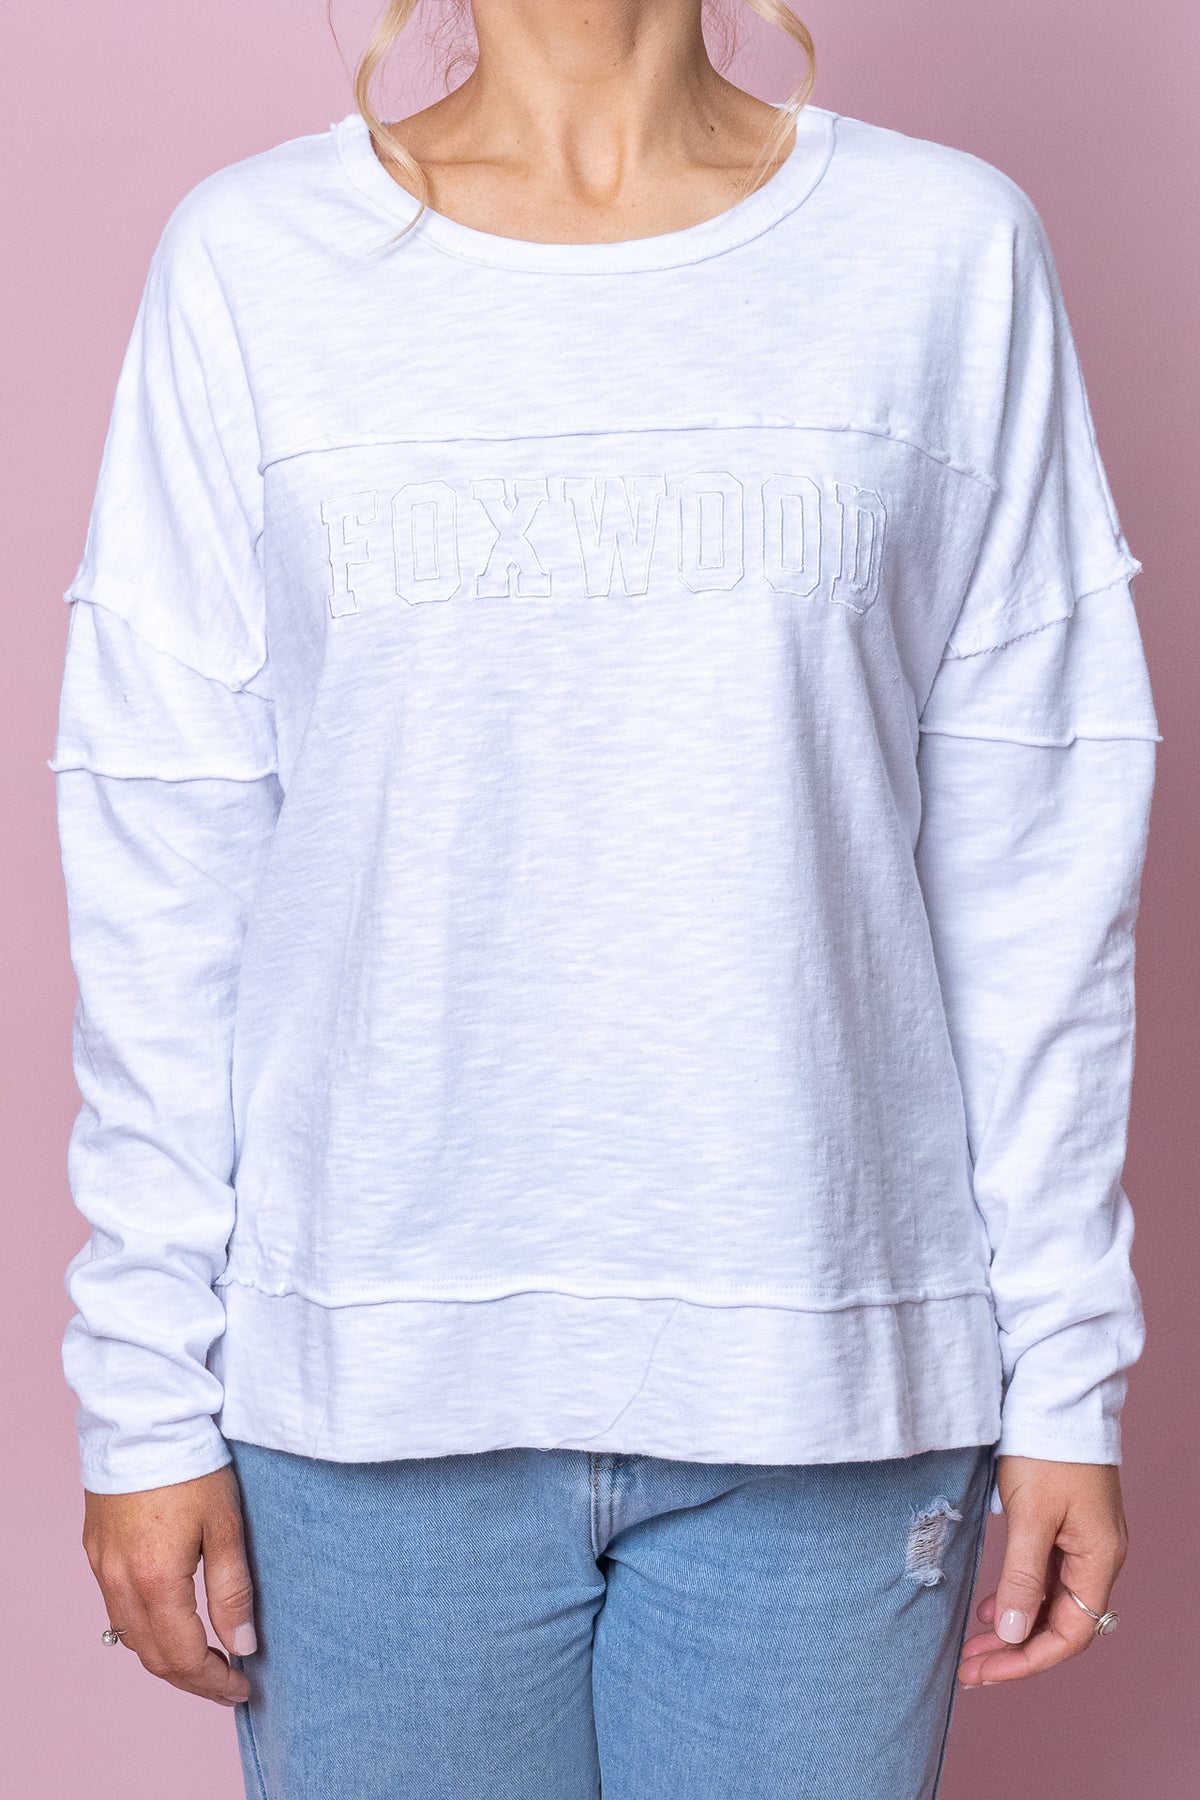 Throw On Top in White - Foxwood